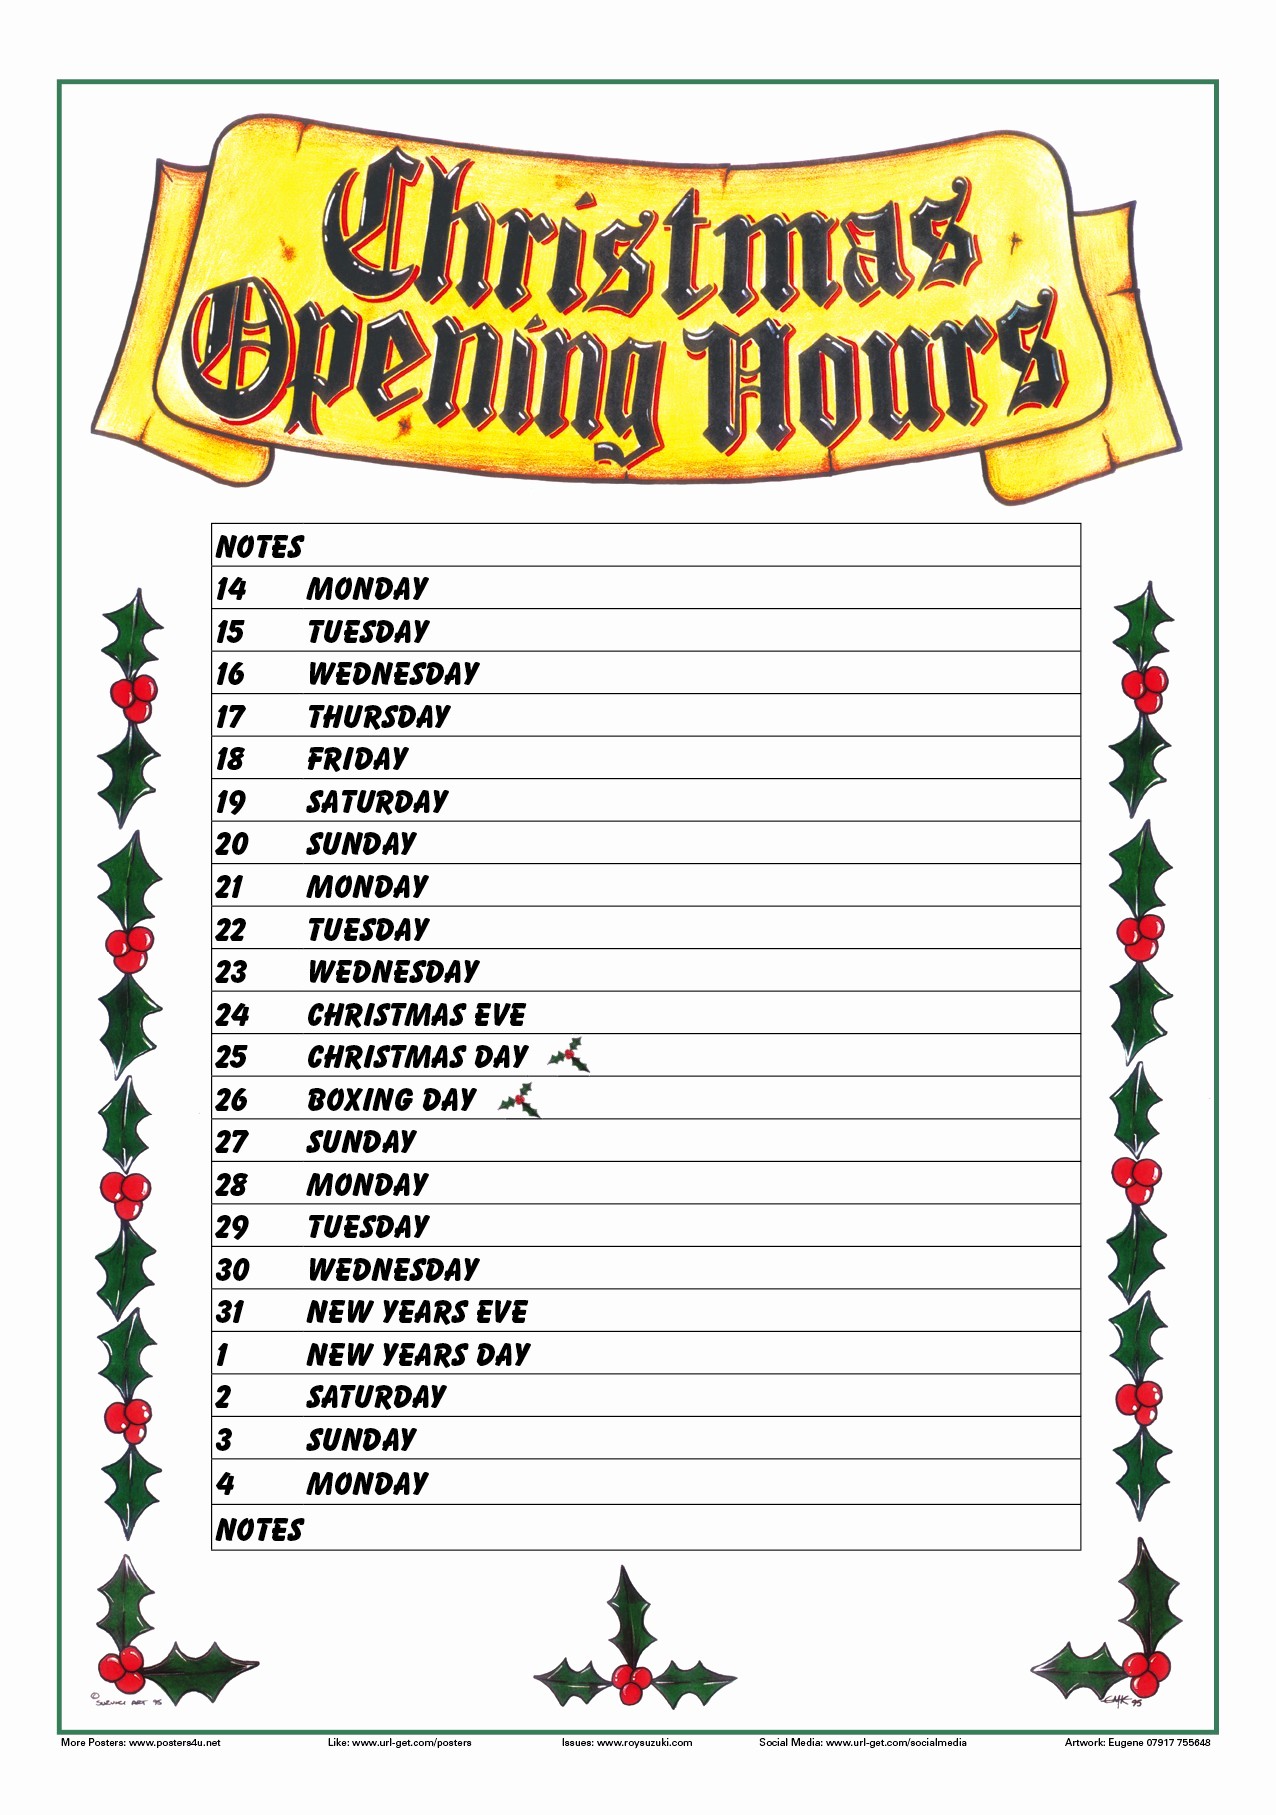 Opening Hours Template Microsoft Word Lovely Christmas Opening Times Template Business Hours Signs with